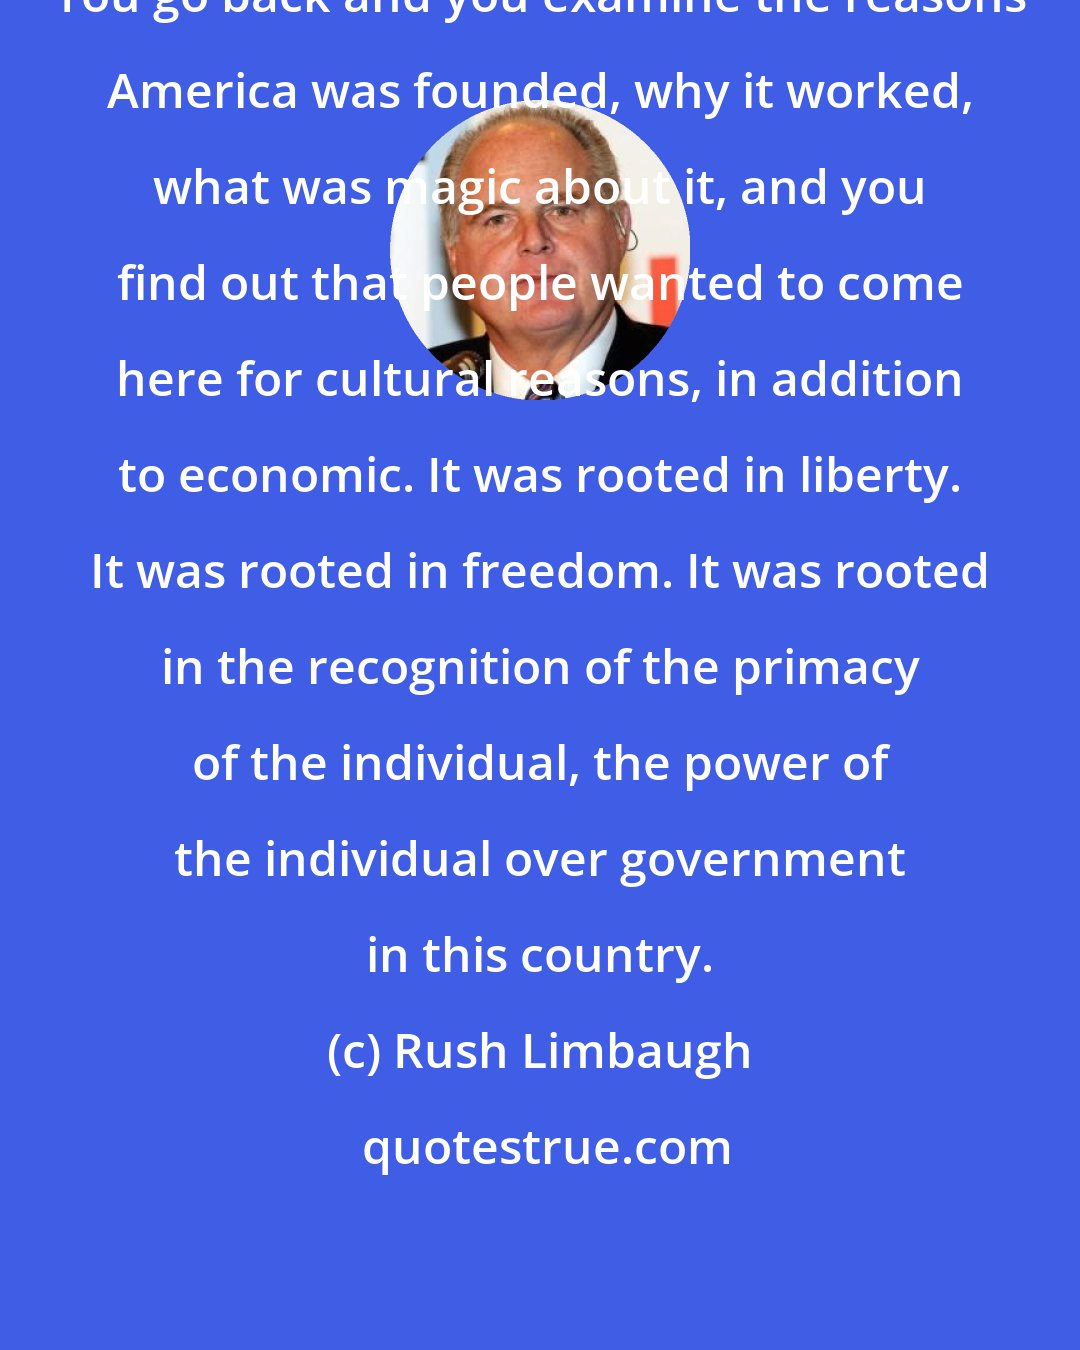 Rush Limbaugh: You go back and you examine the reasons America was founded, why it worked, what was magic about it, and you find out that people wanted to come here for cultural reasons, in addition to economic. It was rooted in liberty. It was rooted in freedom. It was rooted in the recognition of the primacy of the individual, the power of the individual over government in this country.